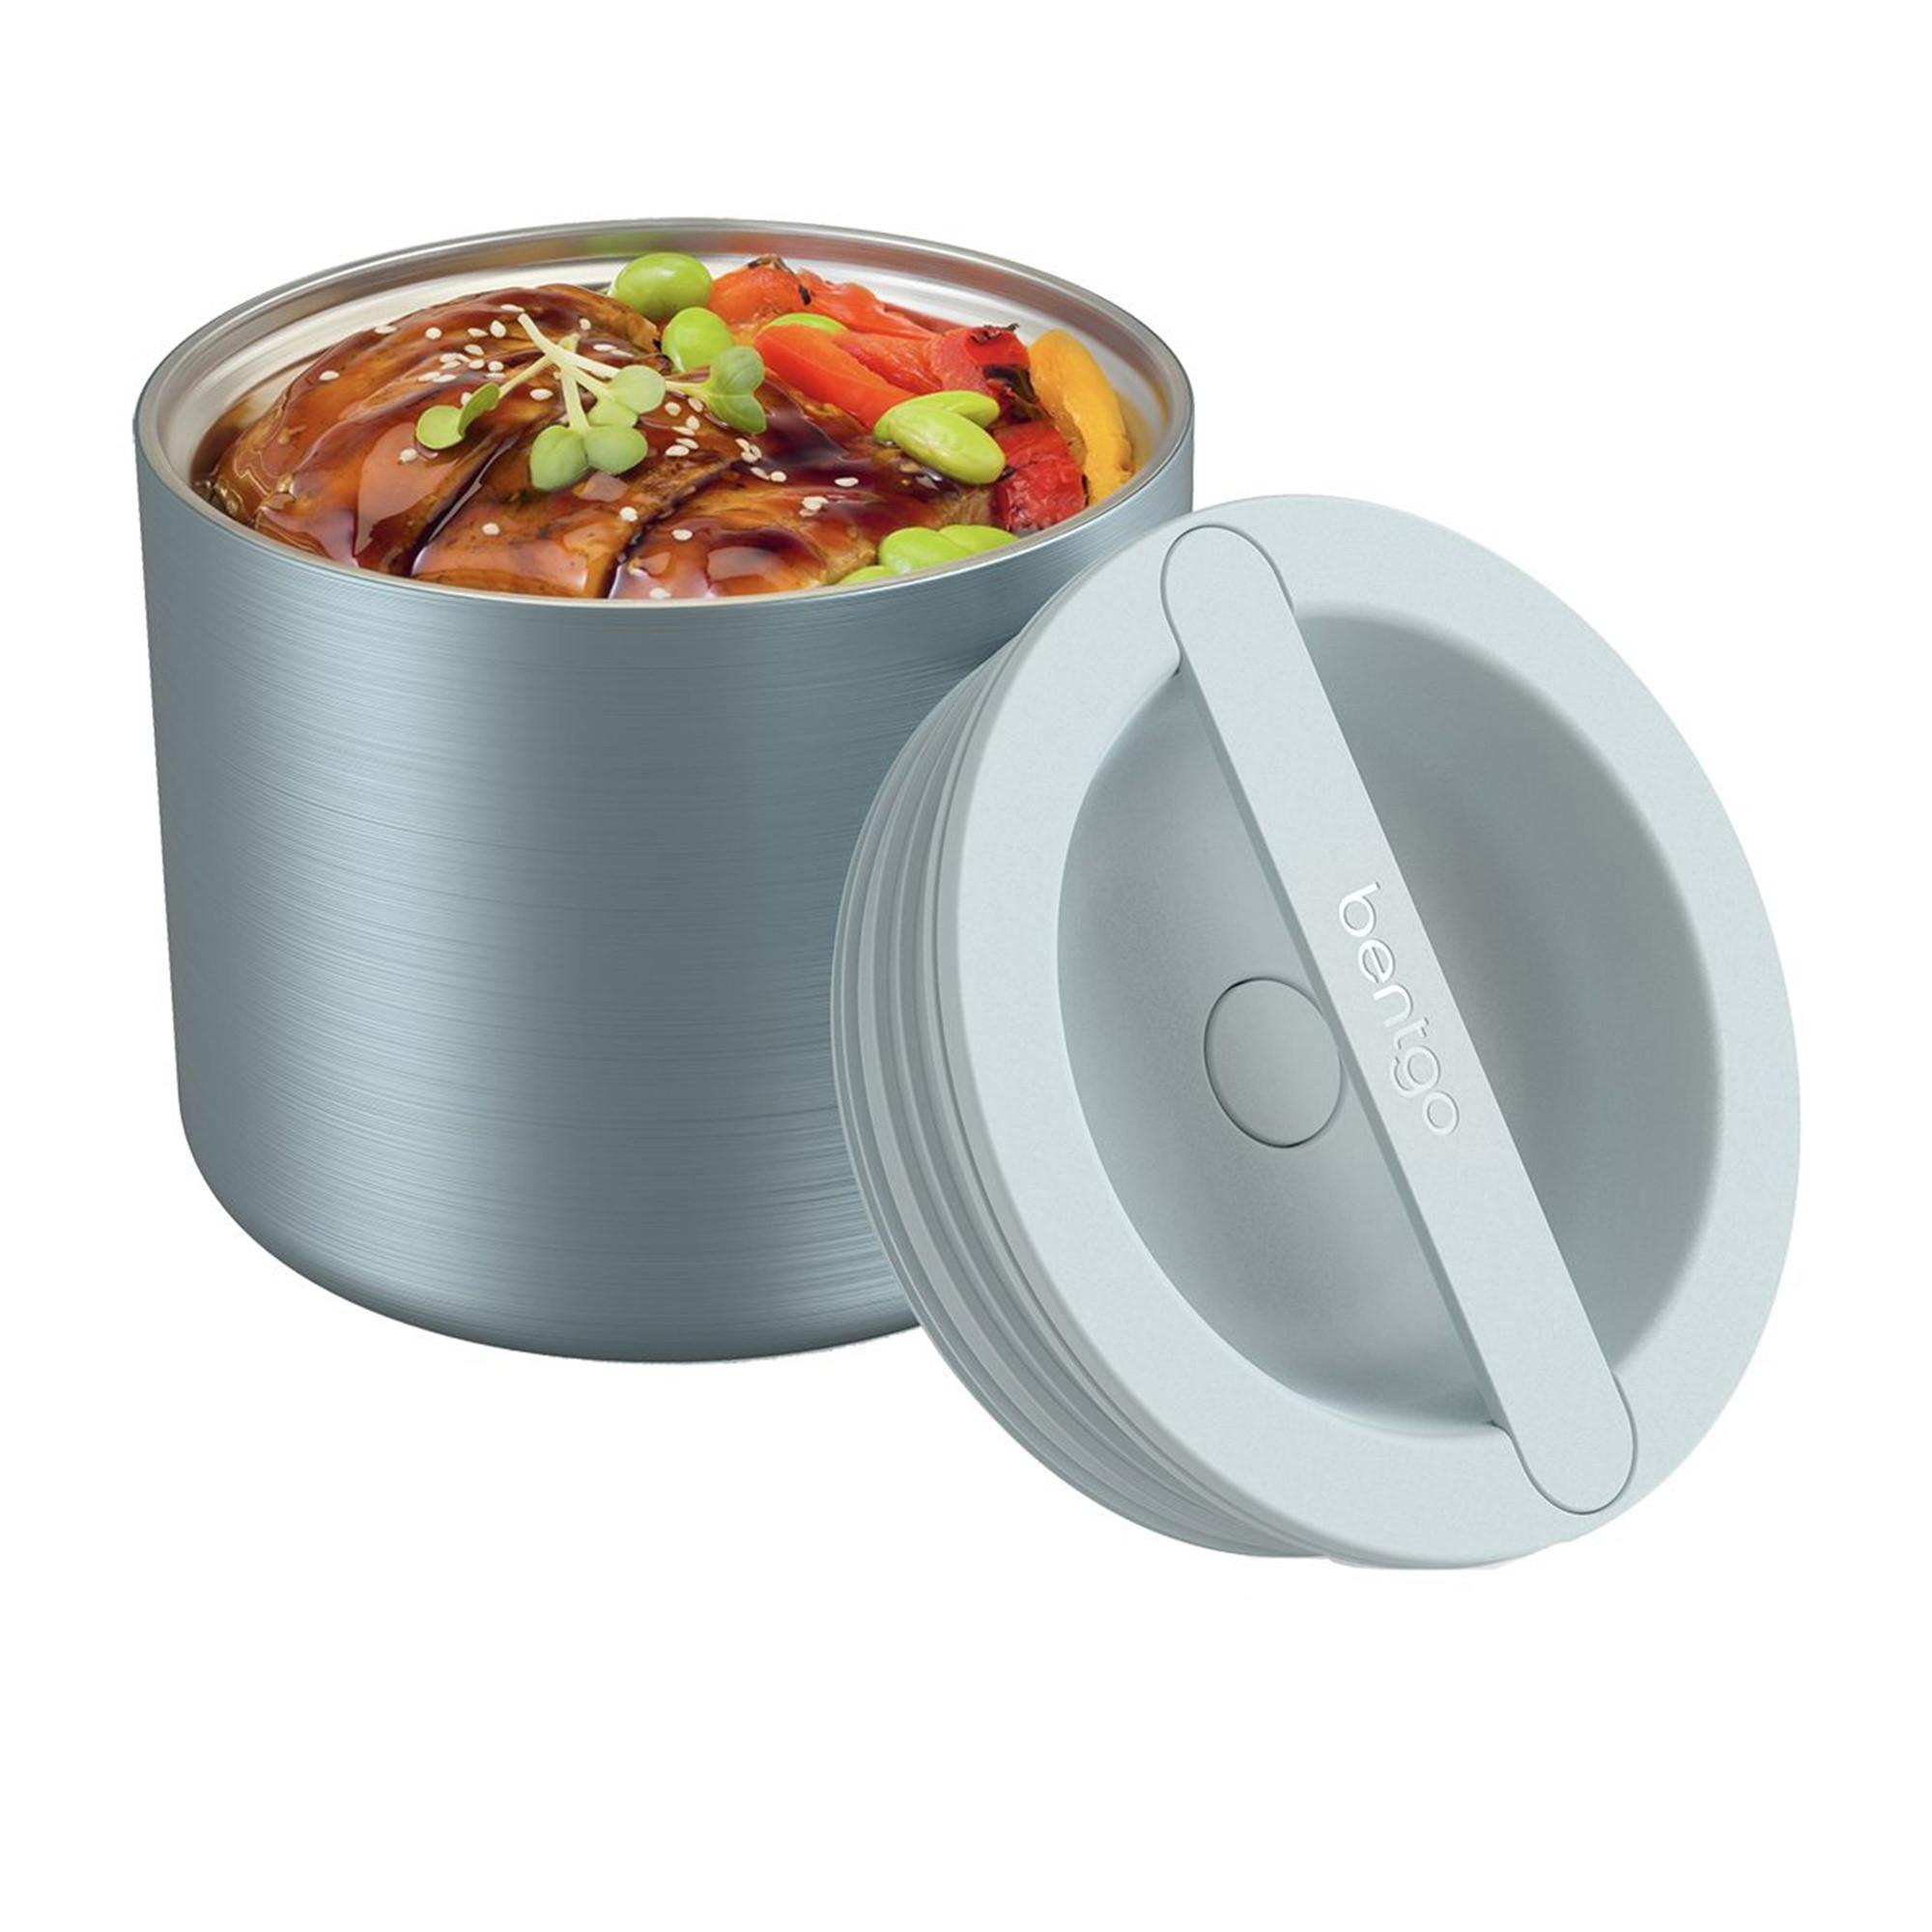 Bentgo Stainless Steel Insulated Food Container 560ml Aqua Image 4